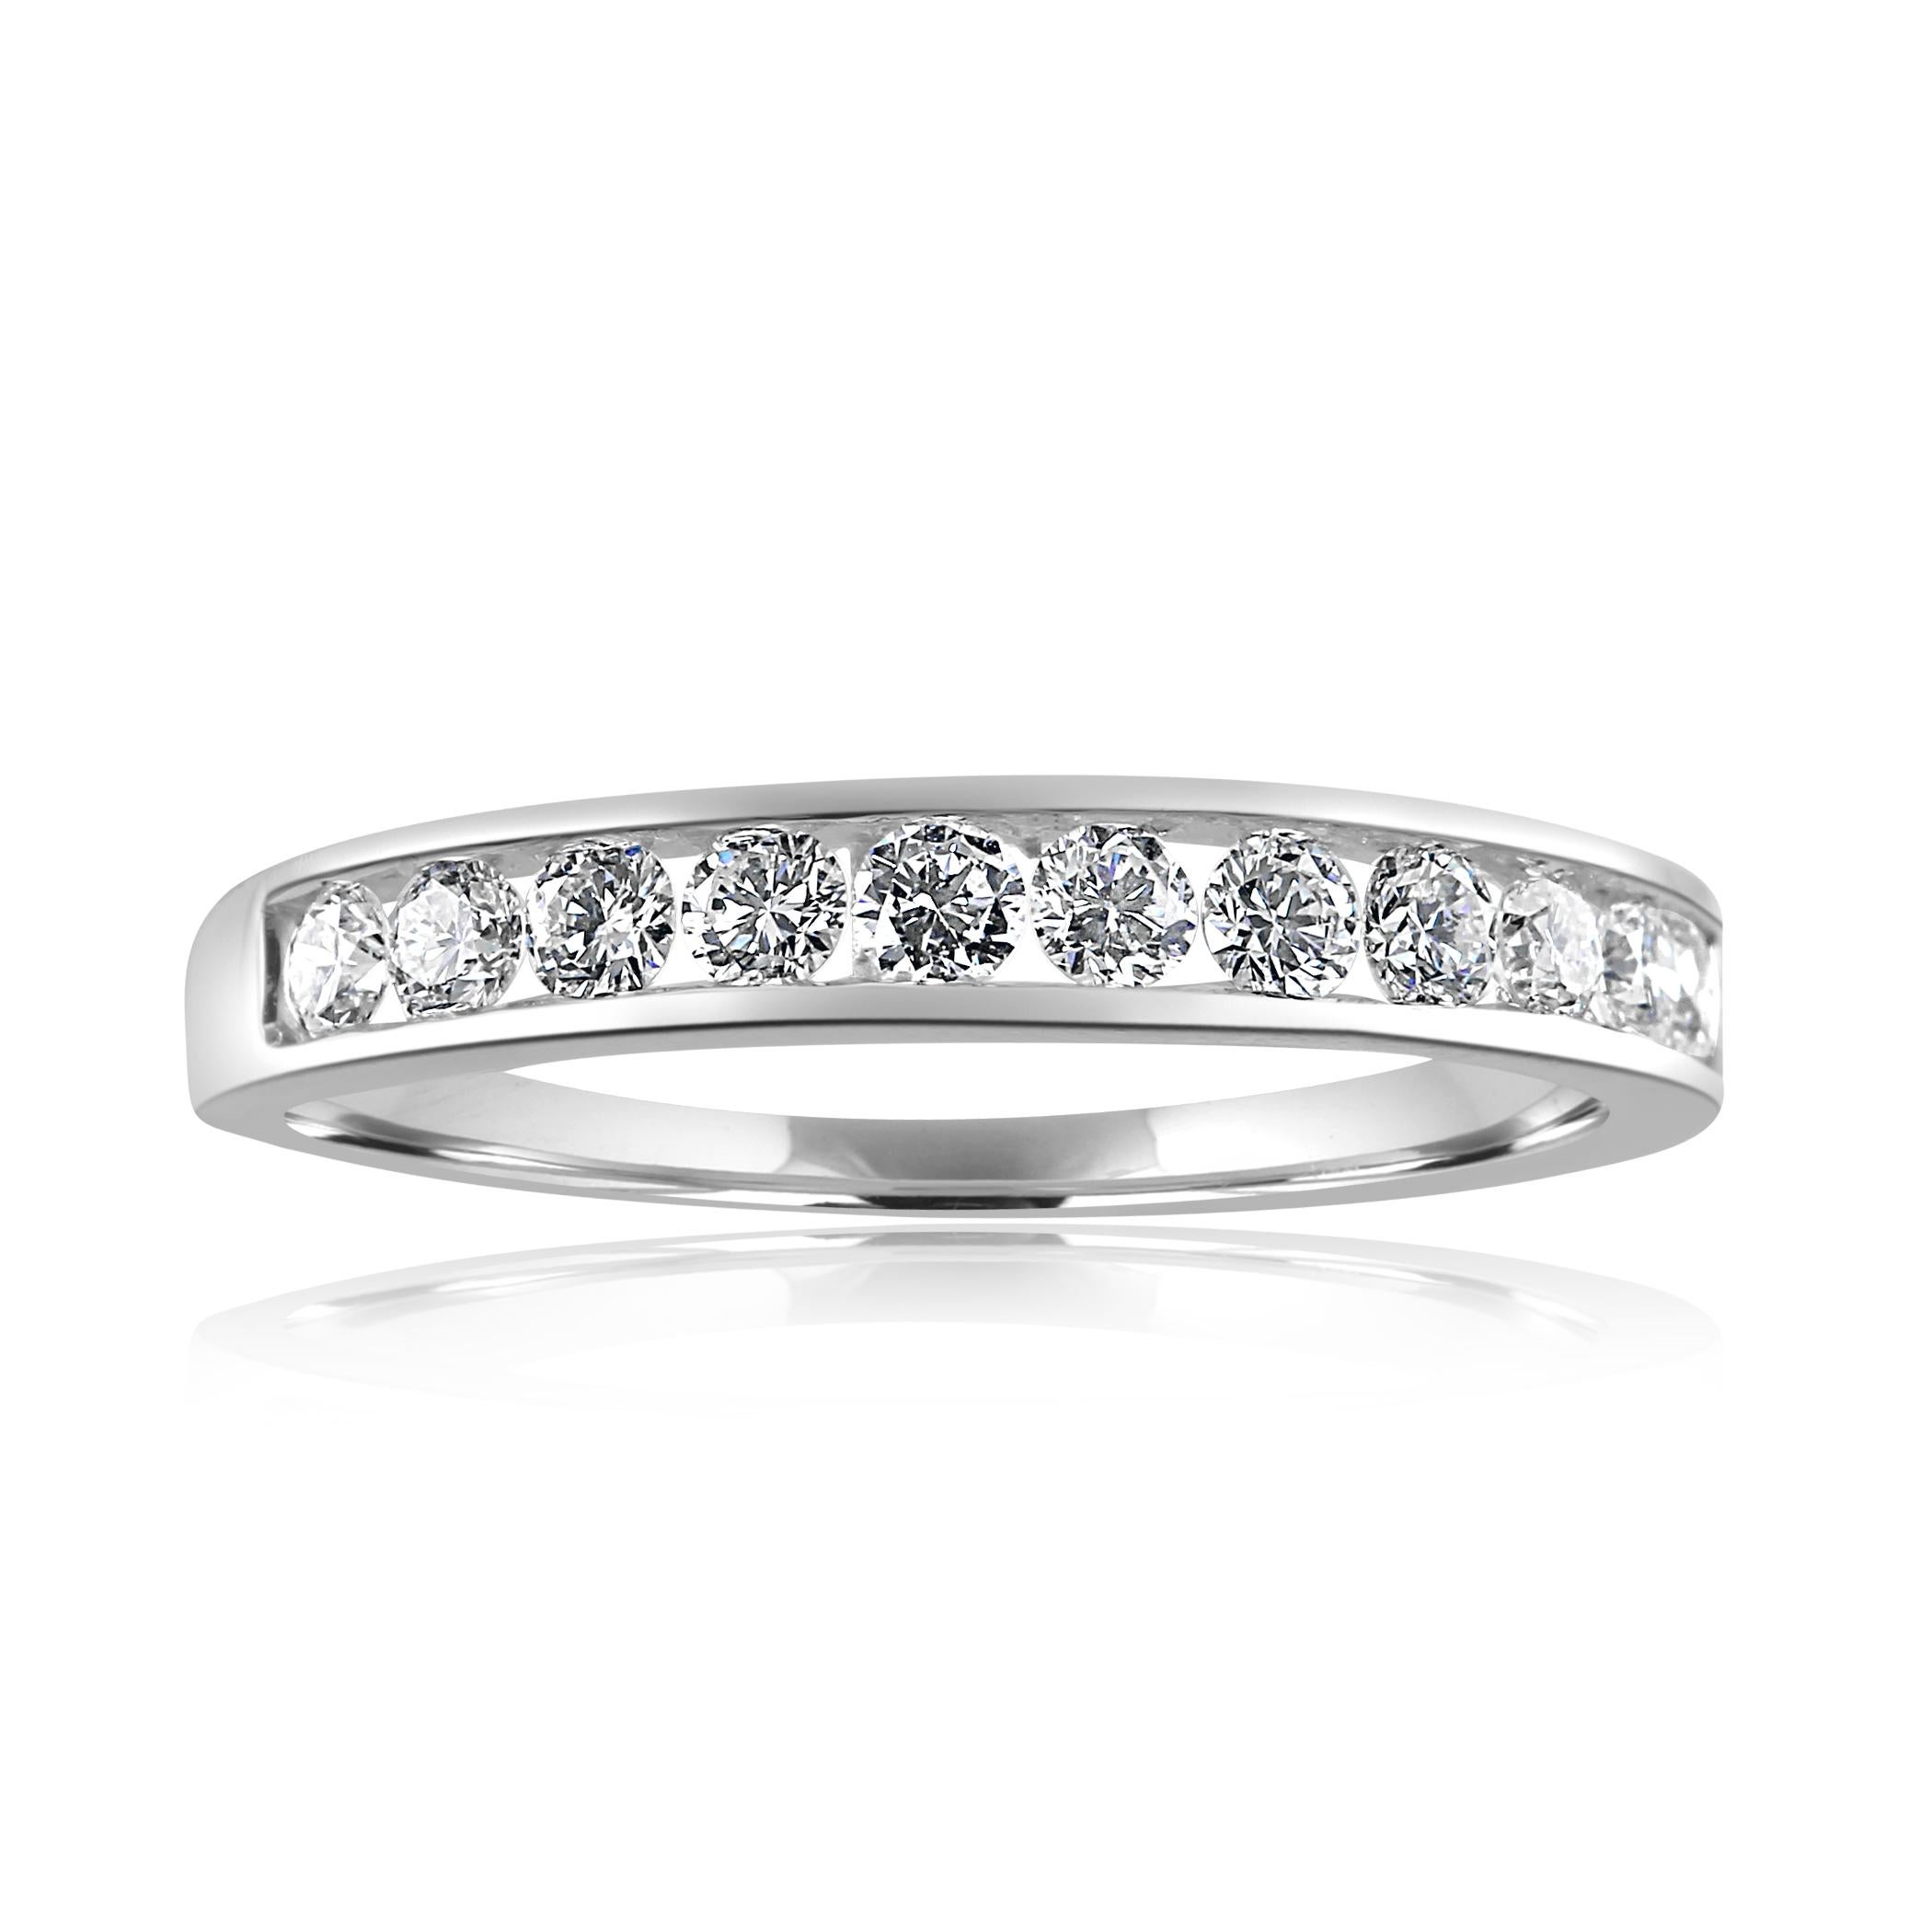 A True Classic 11 White Diamond Rounds GH Color VS-SI Clarity 0.50 Carat Channel set in 14k White gold Bridal Fashion Cocktail Band Ring.

Style available in different price ranges. Prices are based on your selection of 4C's Cut, Color, Carat,